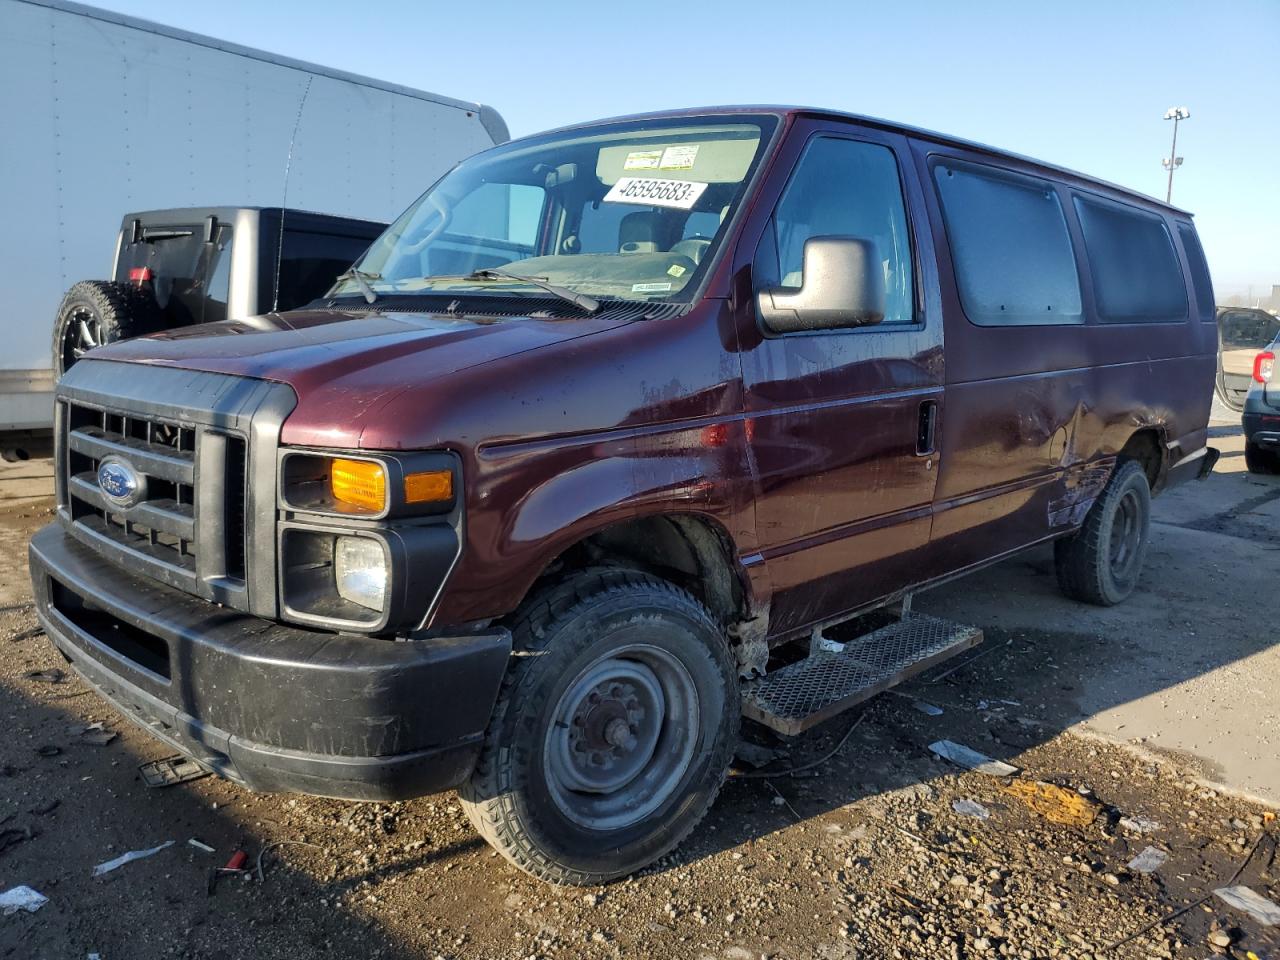 2011 Ford Econoline E350 Super Duty Wagon for sale at Copart Woodhaven, MI  Lot #46595*** | SalvageReseller.com